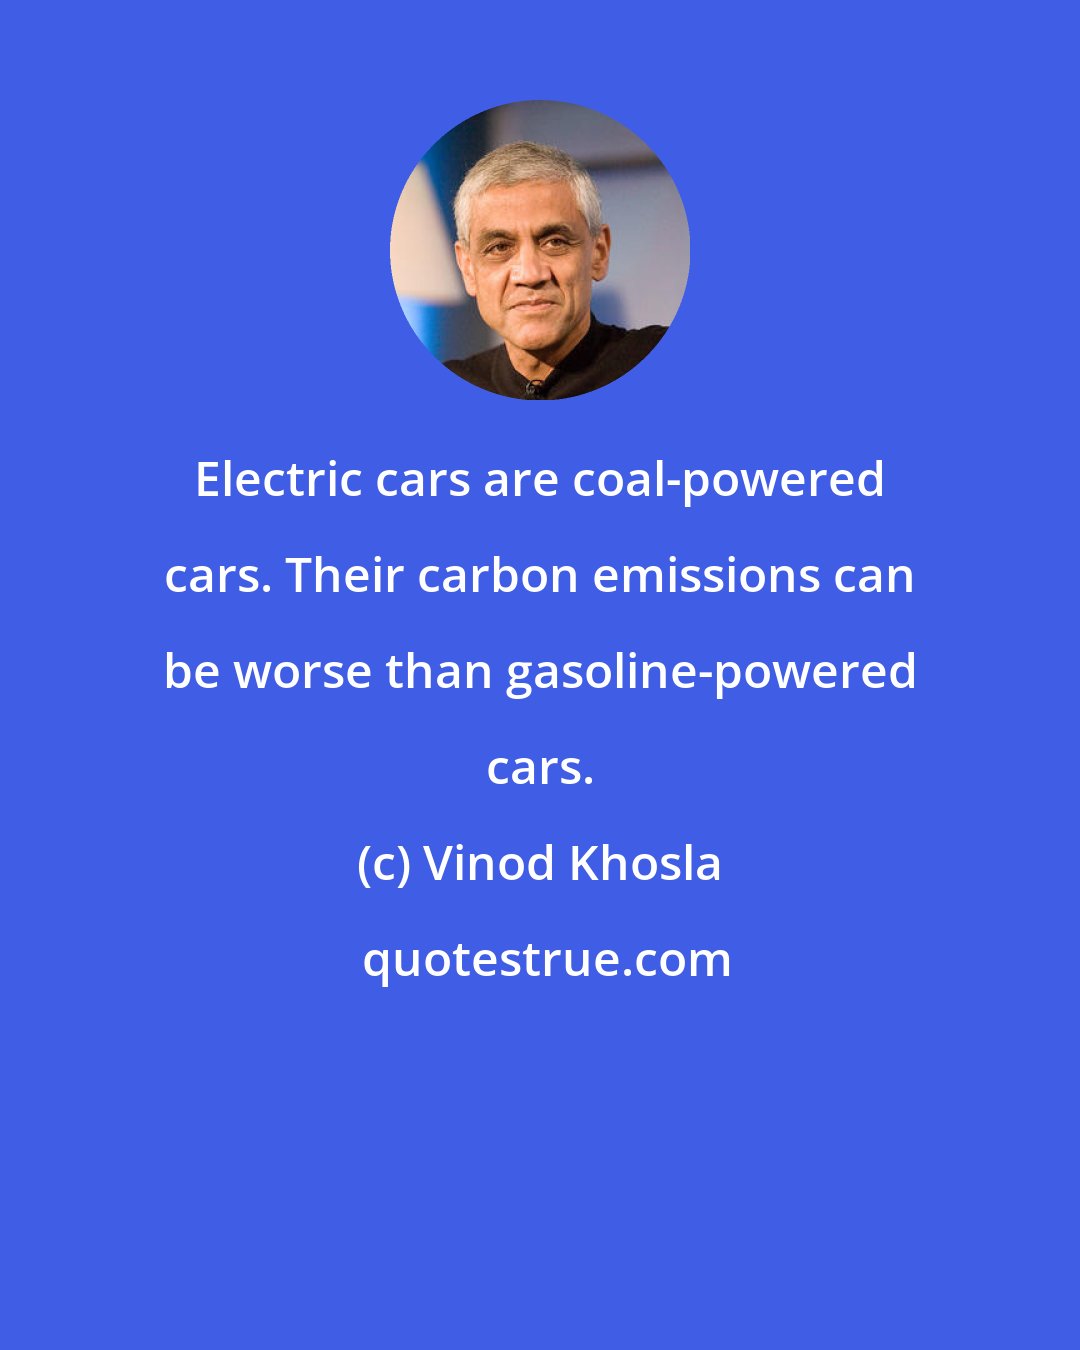 Vinod Khosla: Electric cars are coal-powered cars. Their carbon emissions can be worse than gasoline-powered cars.